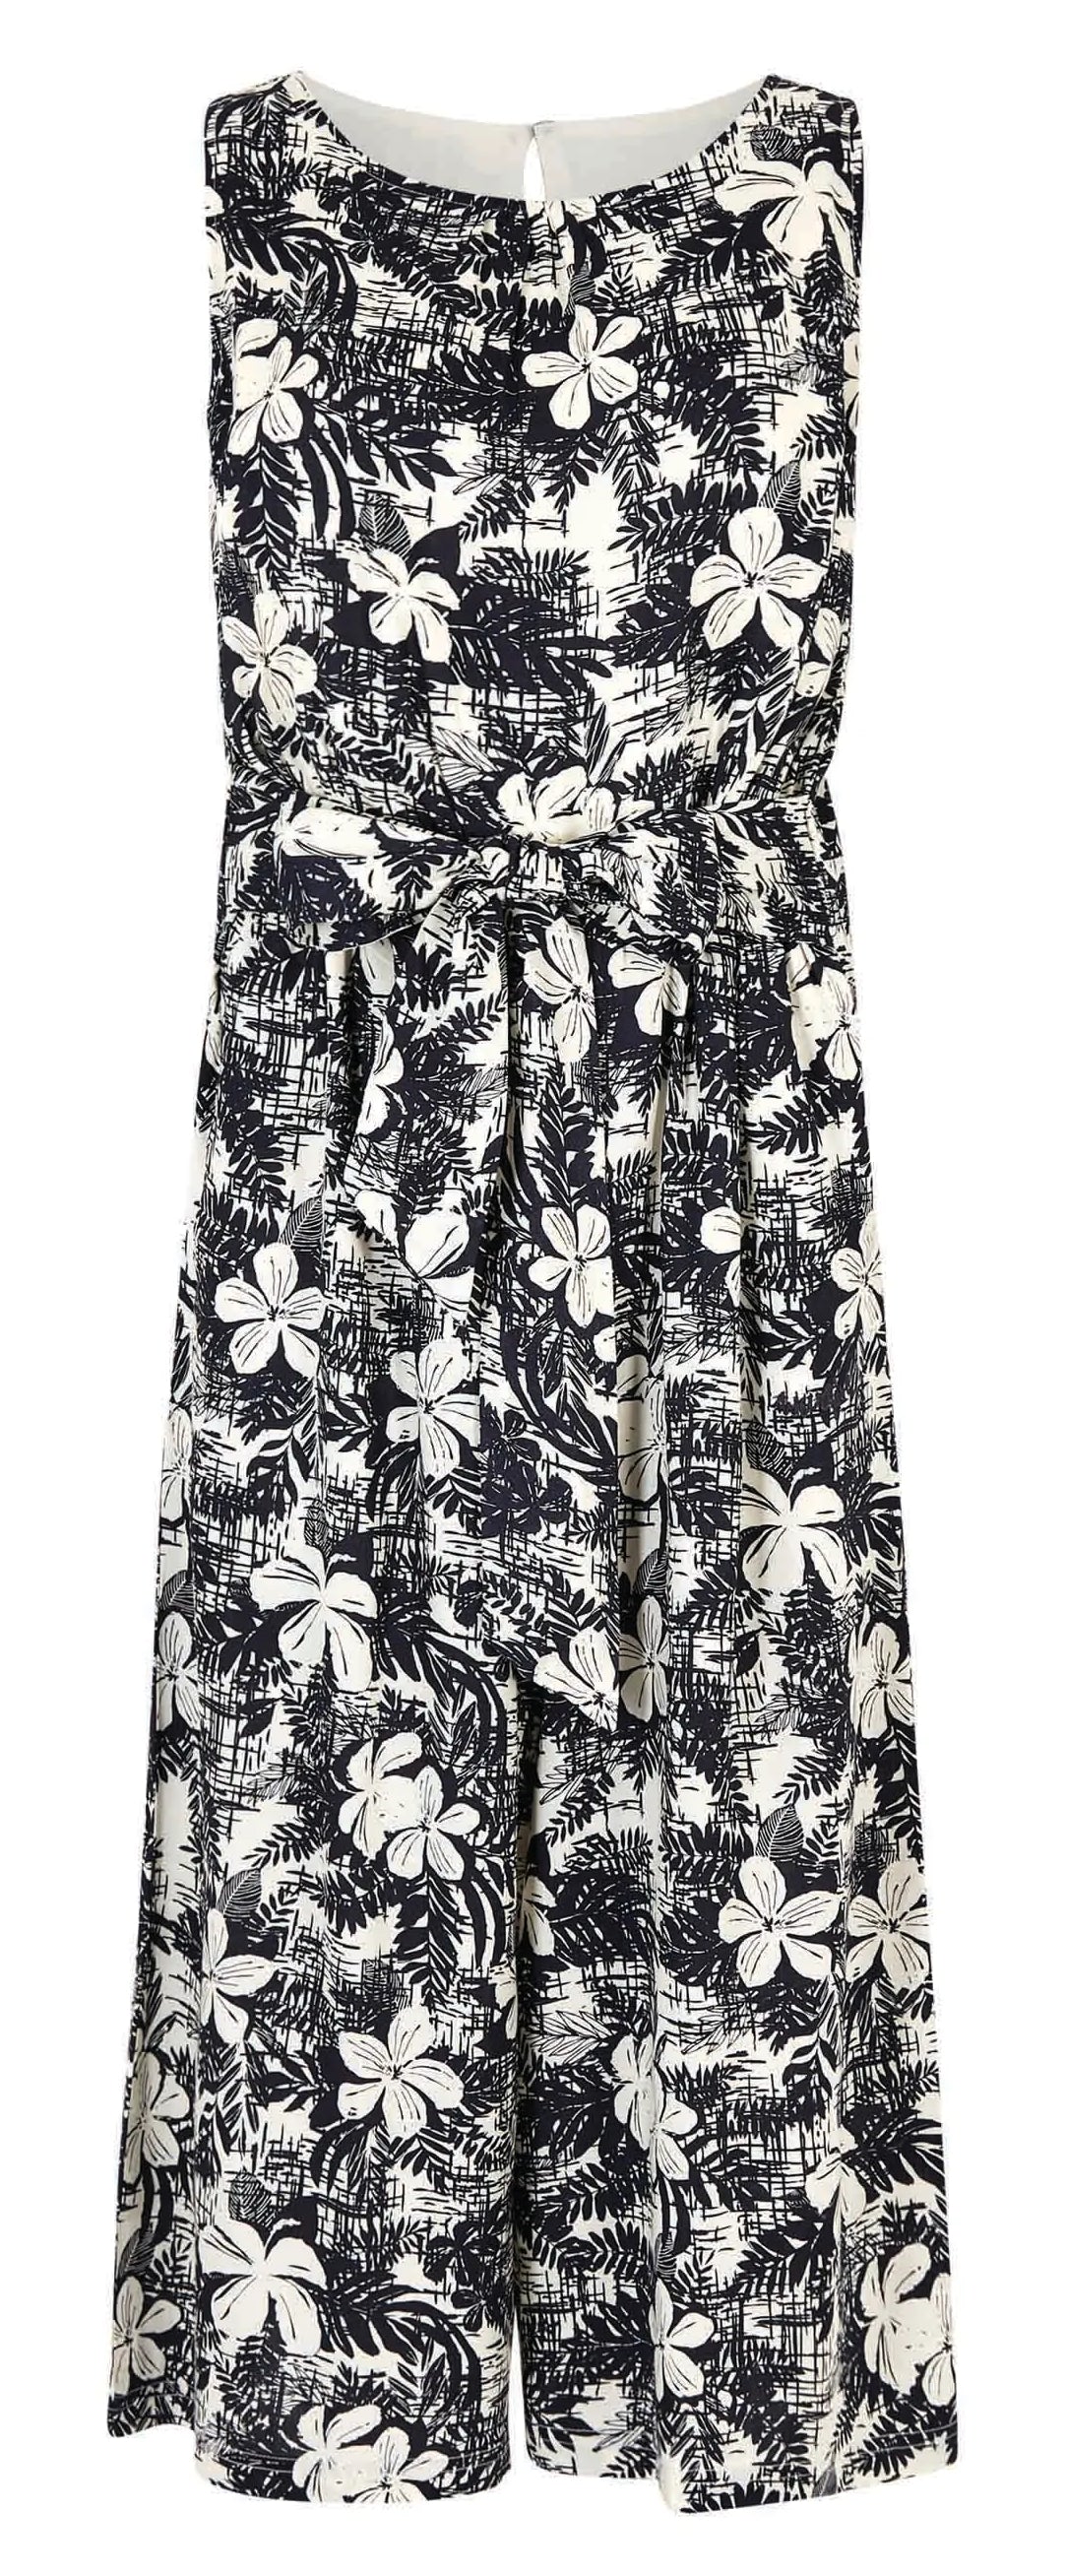 Women's sleeveless, wide legged viscose Nalani jumpsuit from Weird Fish in a Dark Denim Blue and White floral print.